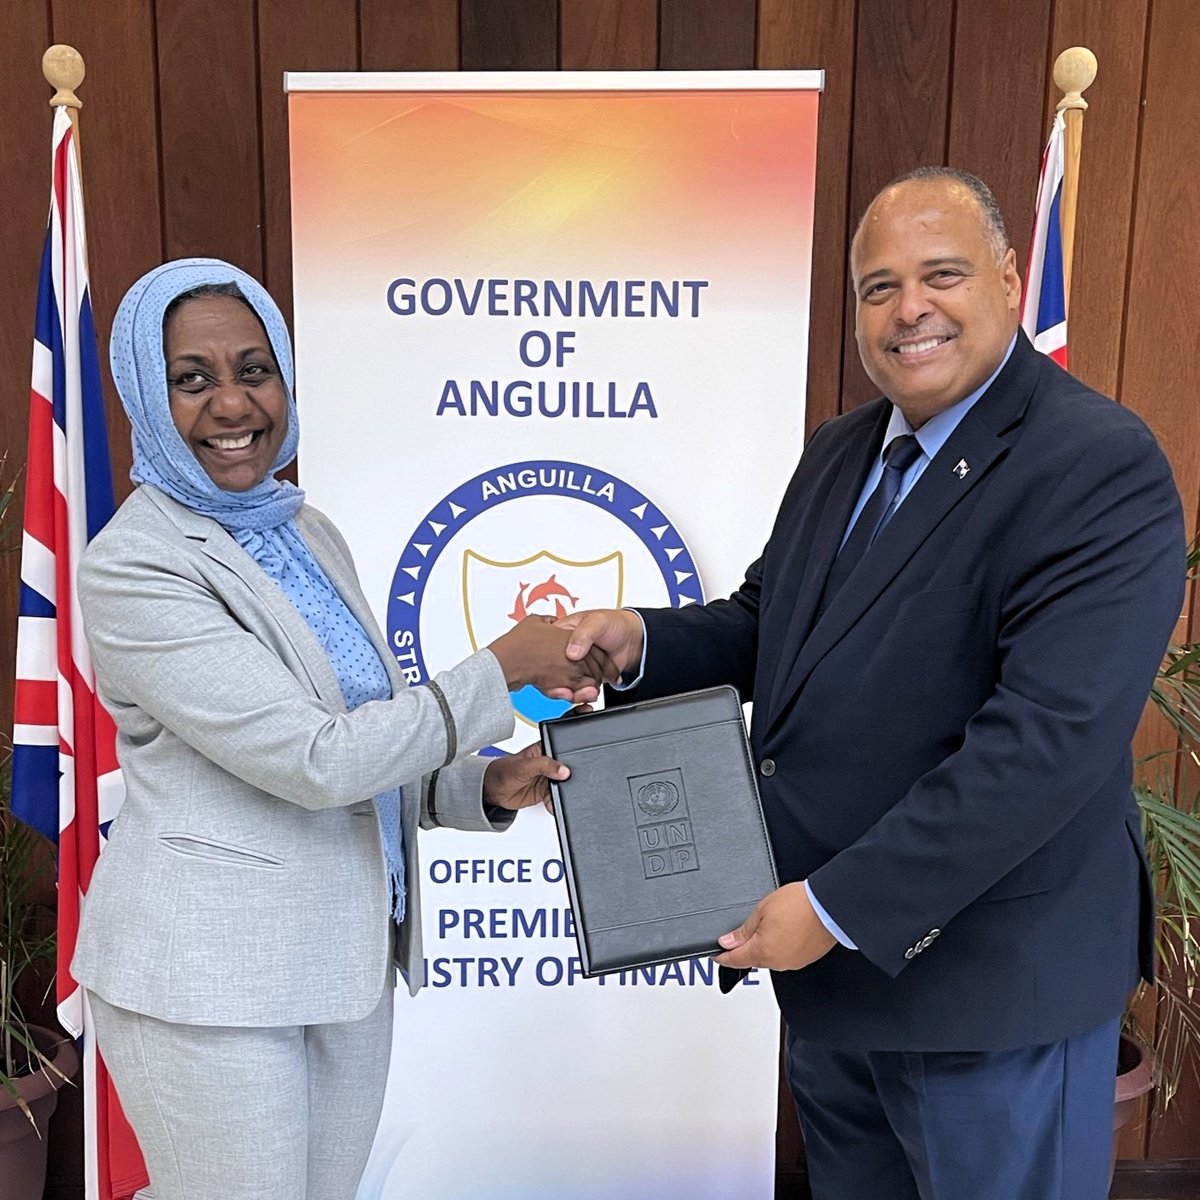 Presented my letters of credence to #Anguilla 🇦🇮Premier, Hon. Dr. Ellis Webster, yesterday. Discussed the way forward for @UNDPBarbadosEC support - #digitaltransformation is critical for improved access to public services, employment & entrepreneurship, especially for #youth.